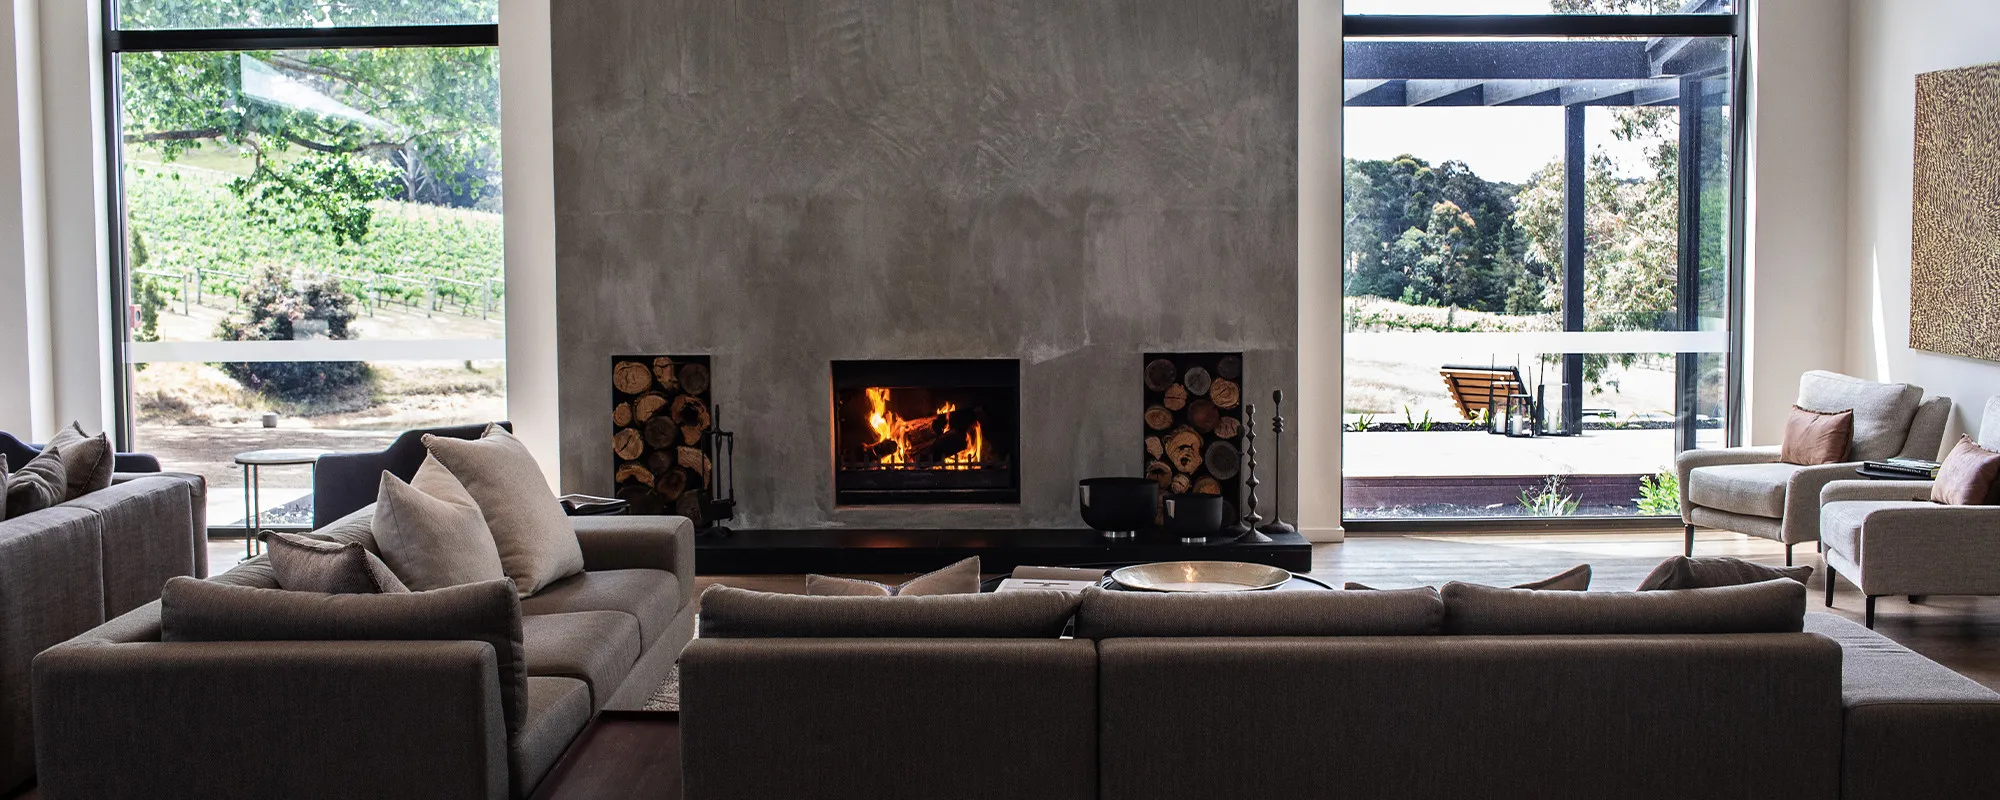 Lancemore Macedon Ranges Boutique Luxury Accommodation Gallery Common Area 2000x800